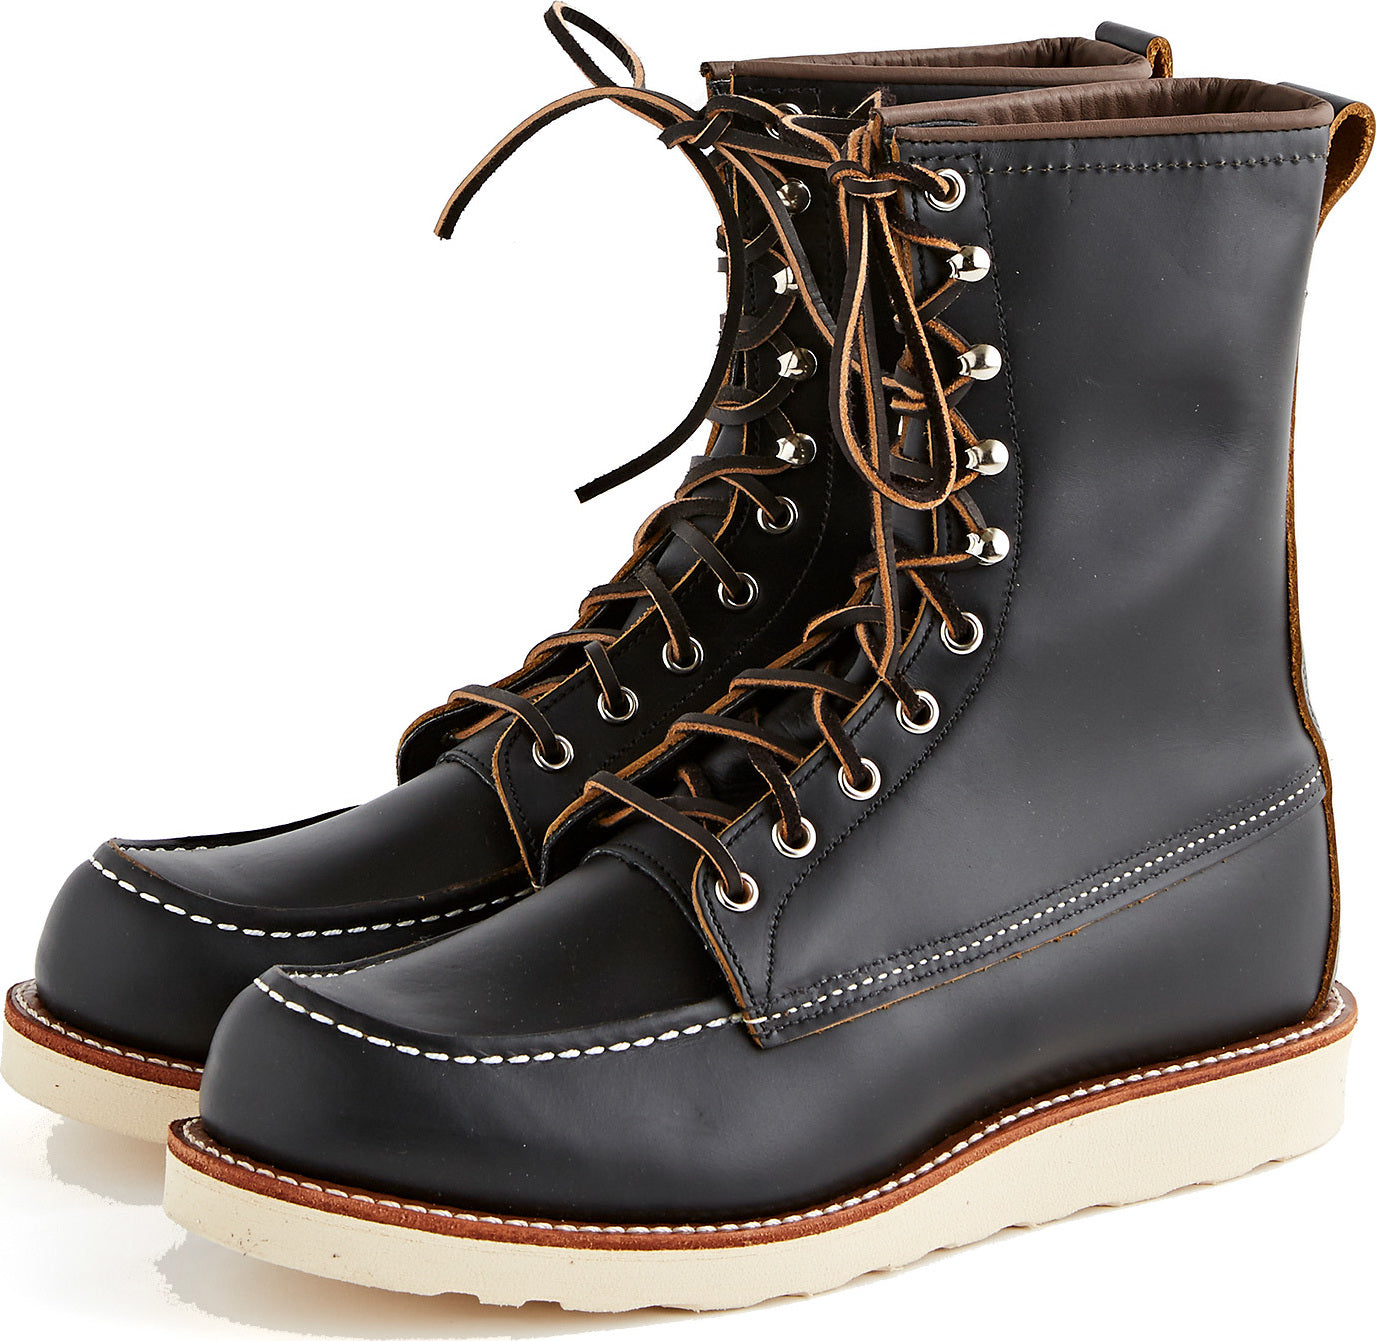 Red Wing Shoes 8-Inch Moc Billy Boots - Men's | Altitude Sports